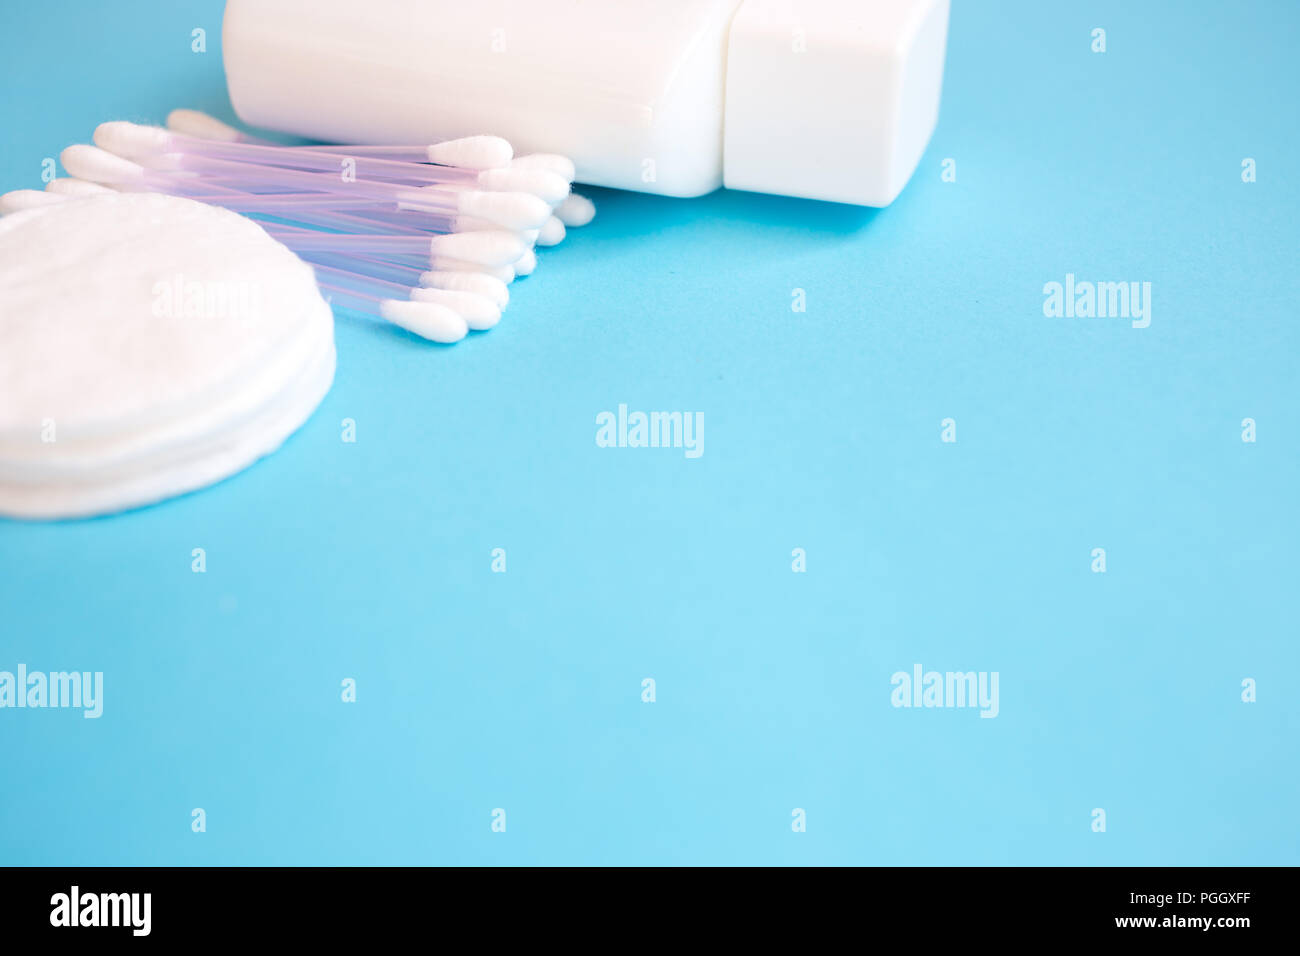 top view personal care products. white bottle, razor, ear sticks, cotton pads, toothbrush on blue background. copy space Stock Photo